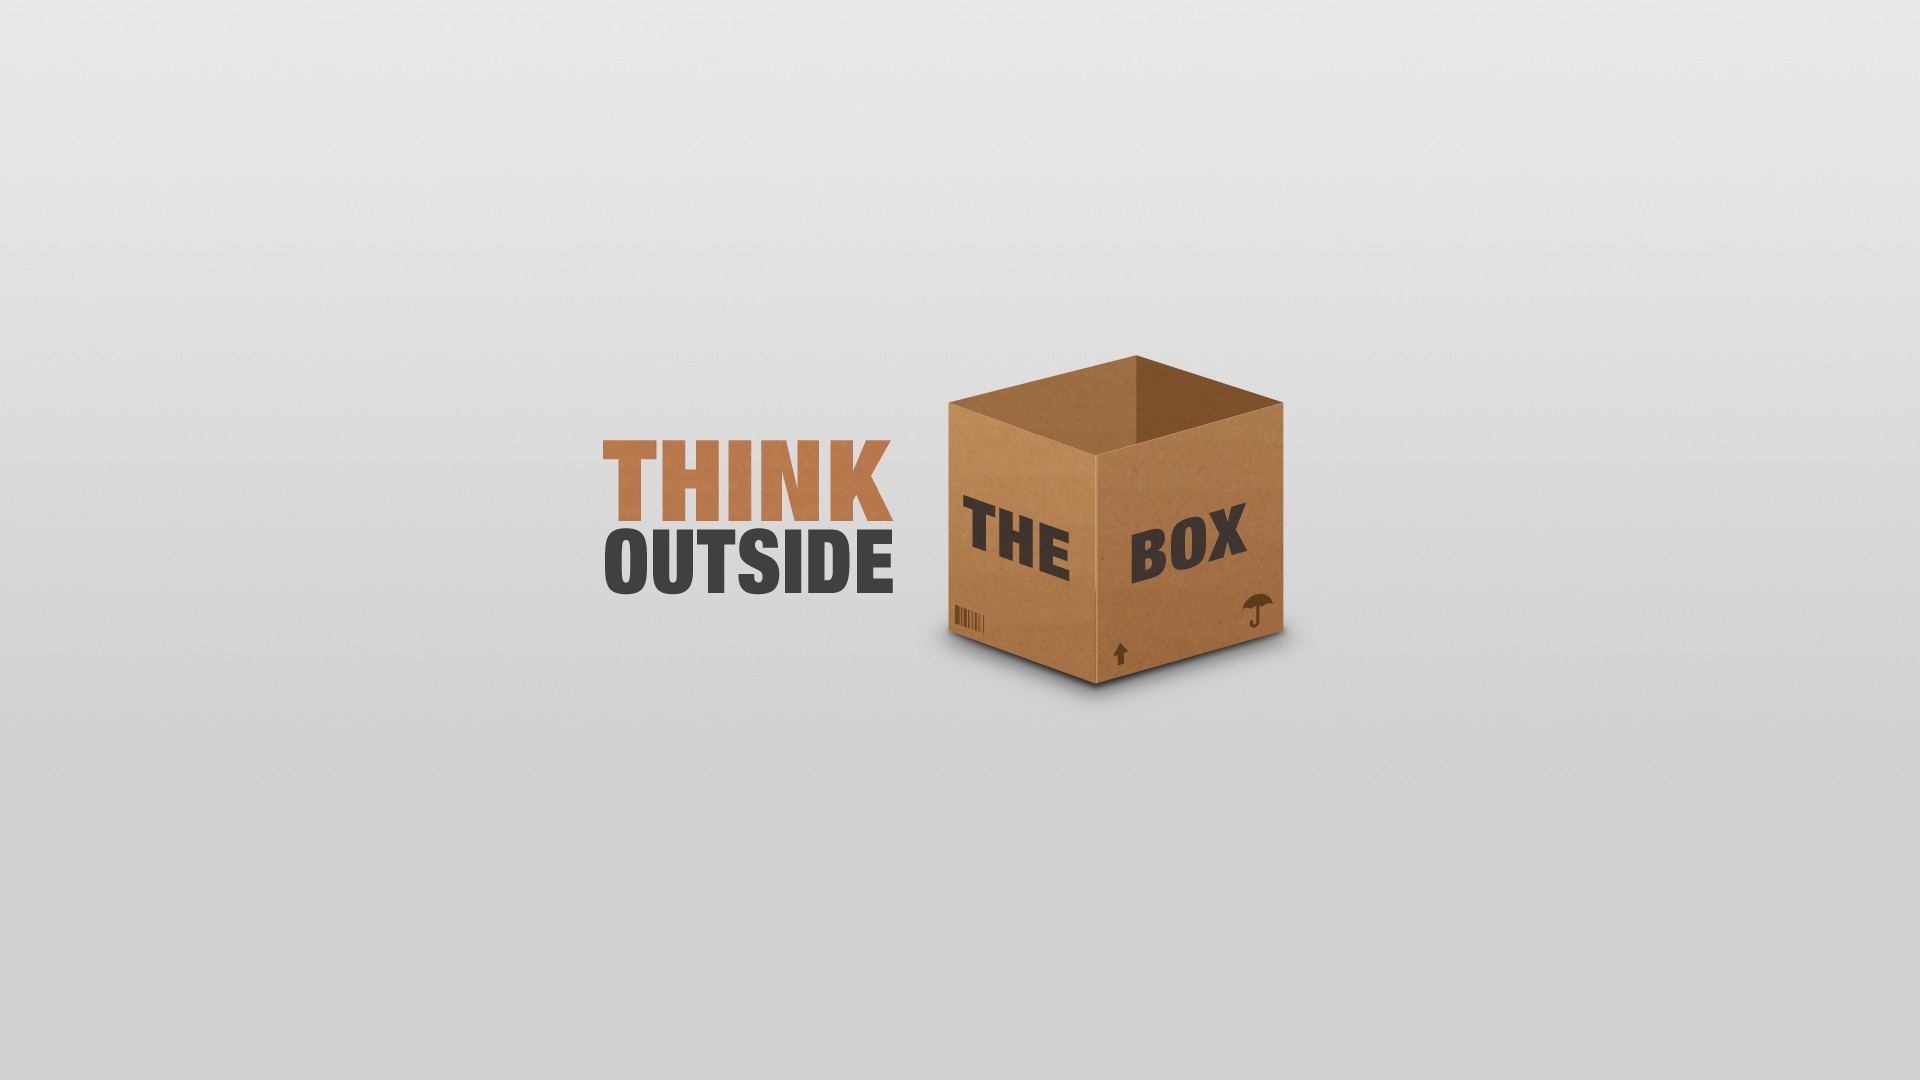 General 1920x1080 quote text minimalism boxes white background simple background carton box